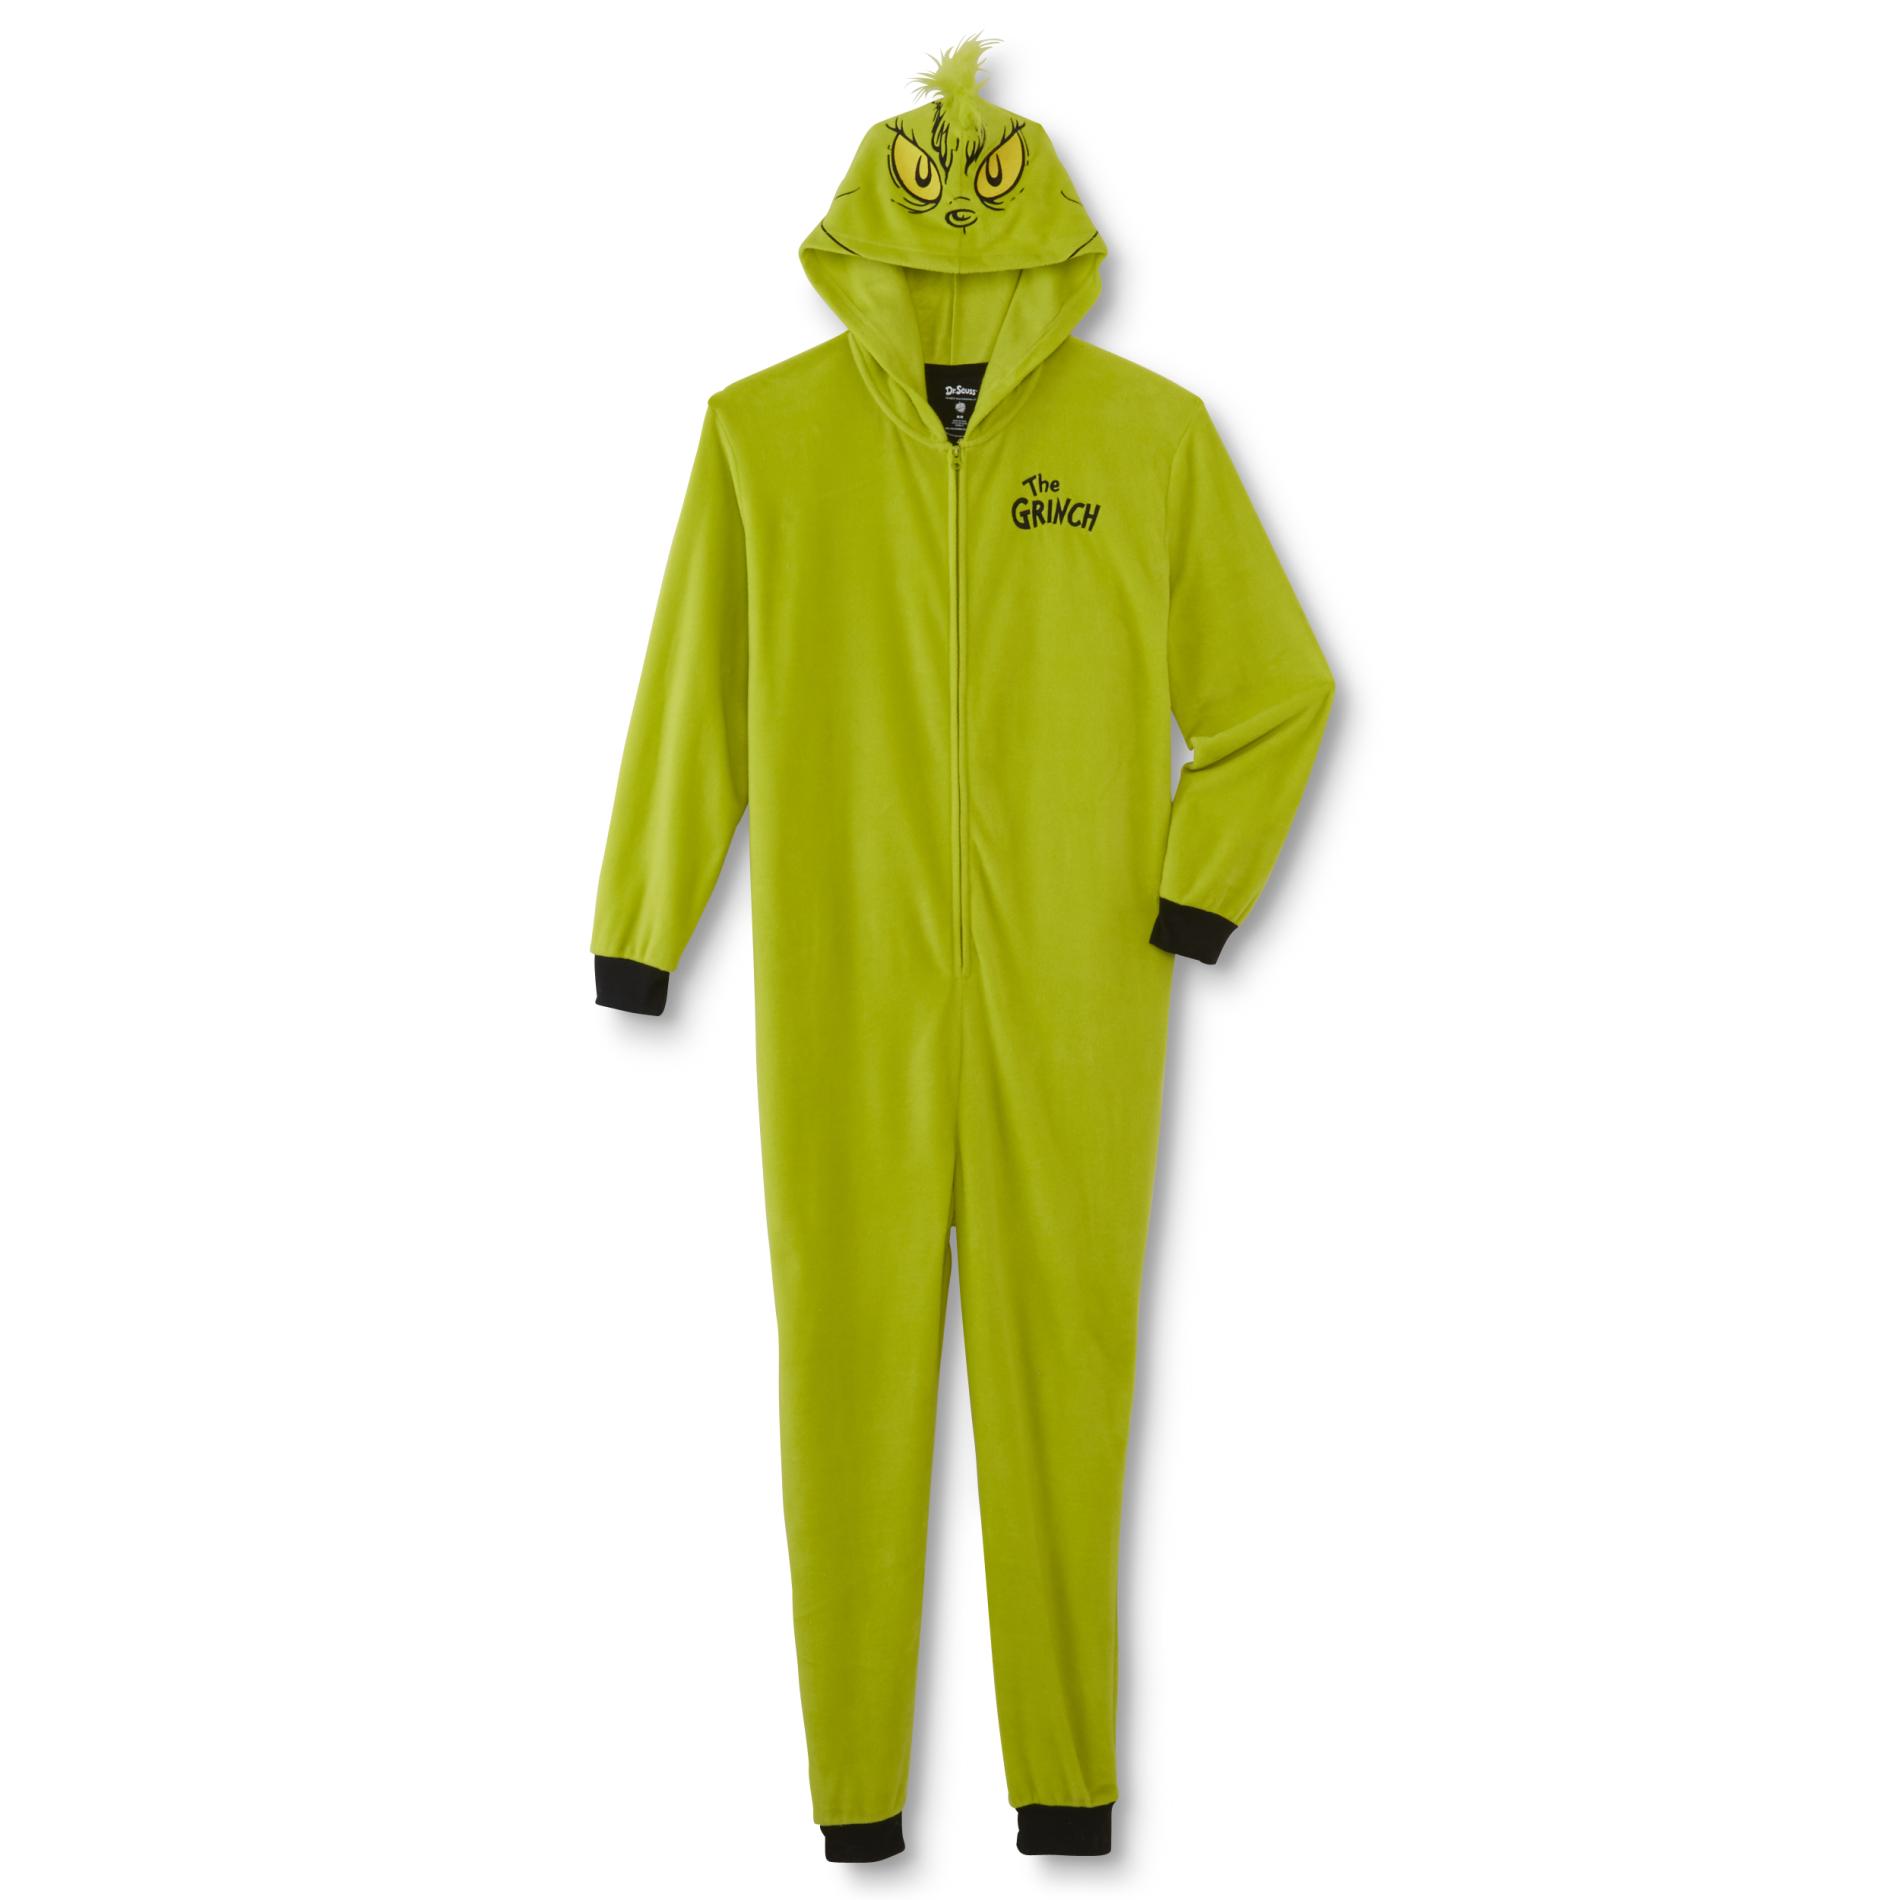 Bumkins The Grinch Men's One-Piece Hooded Christmas Pajamas